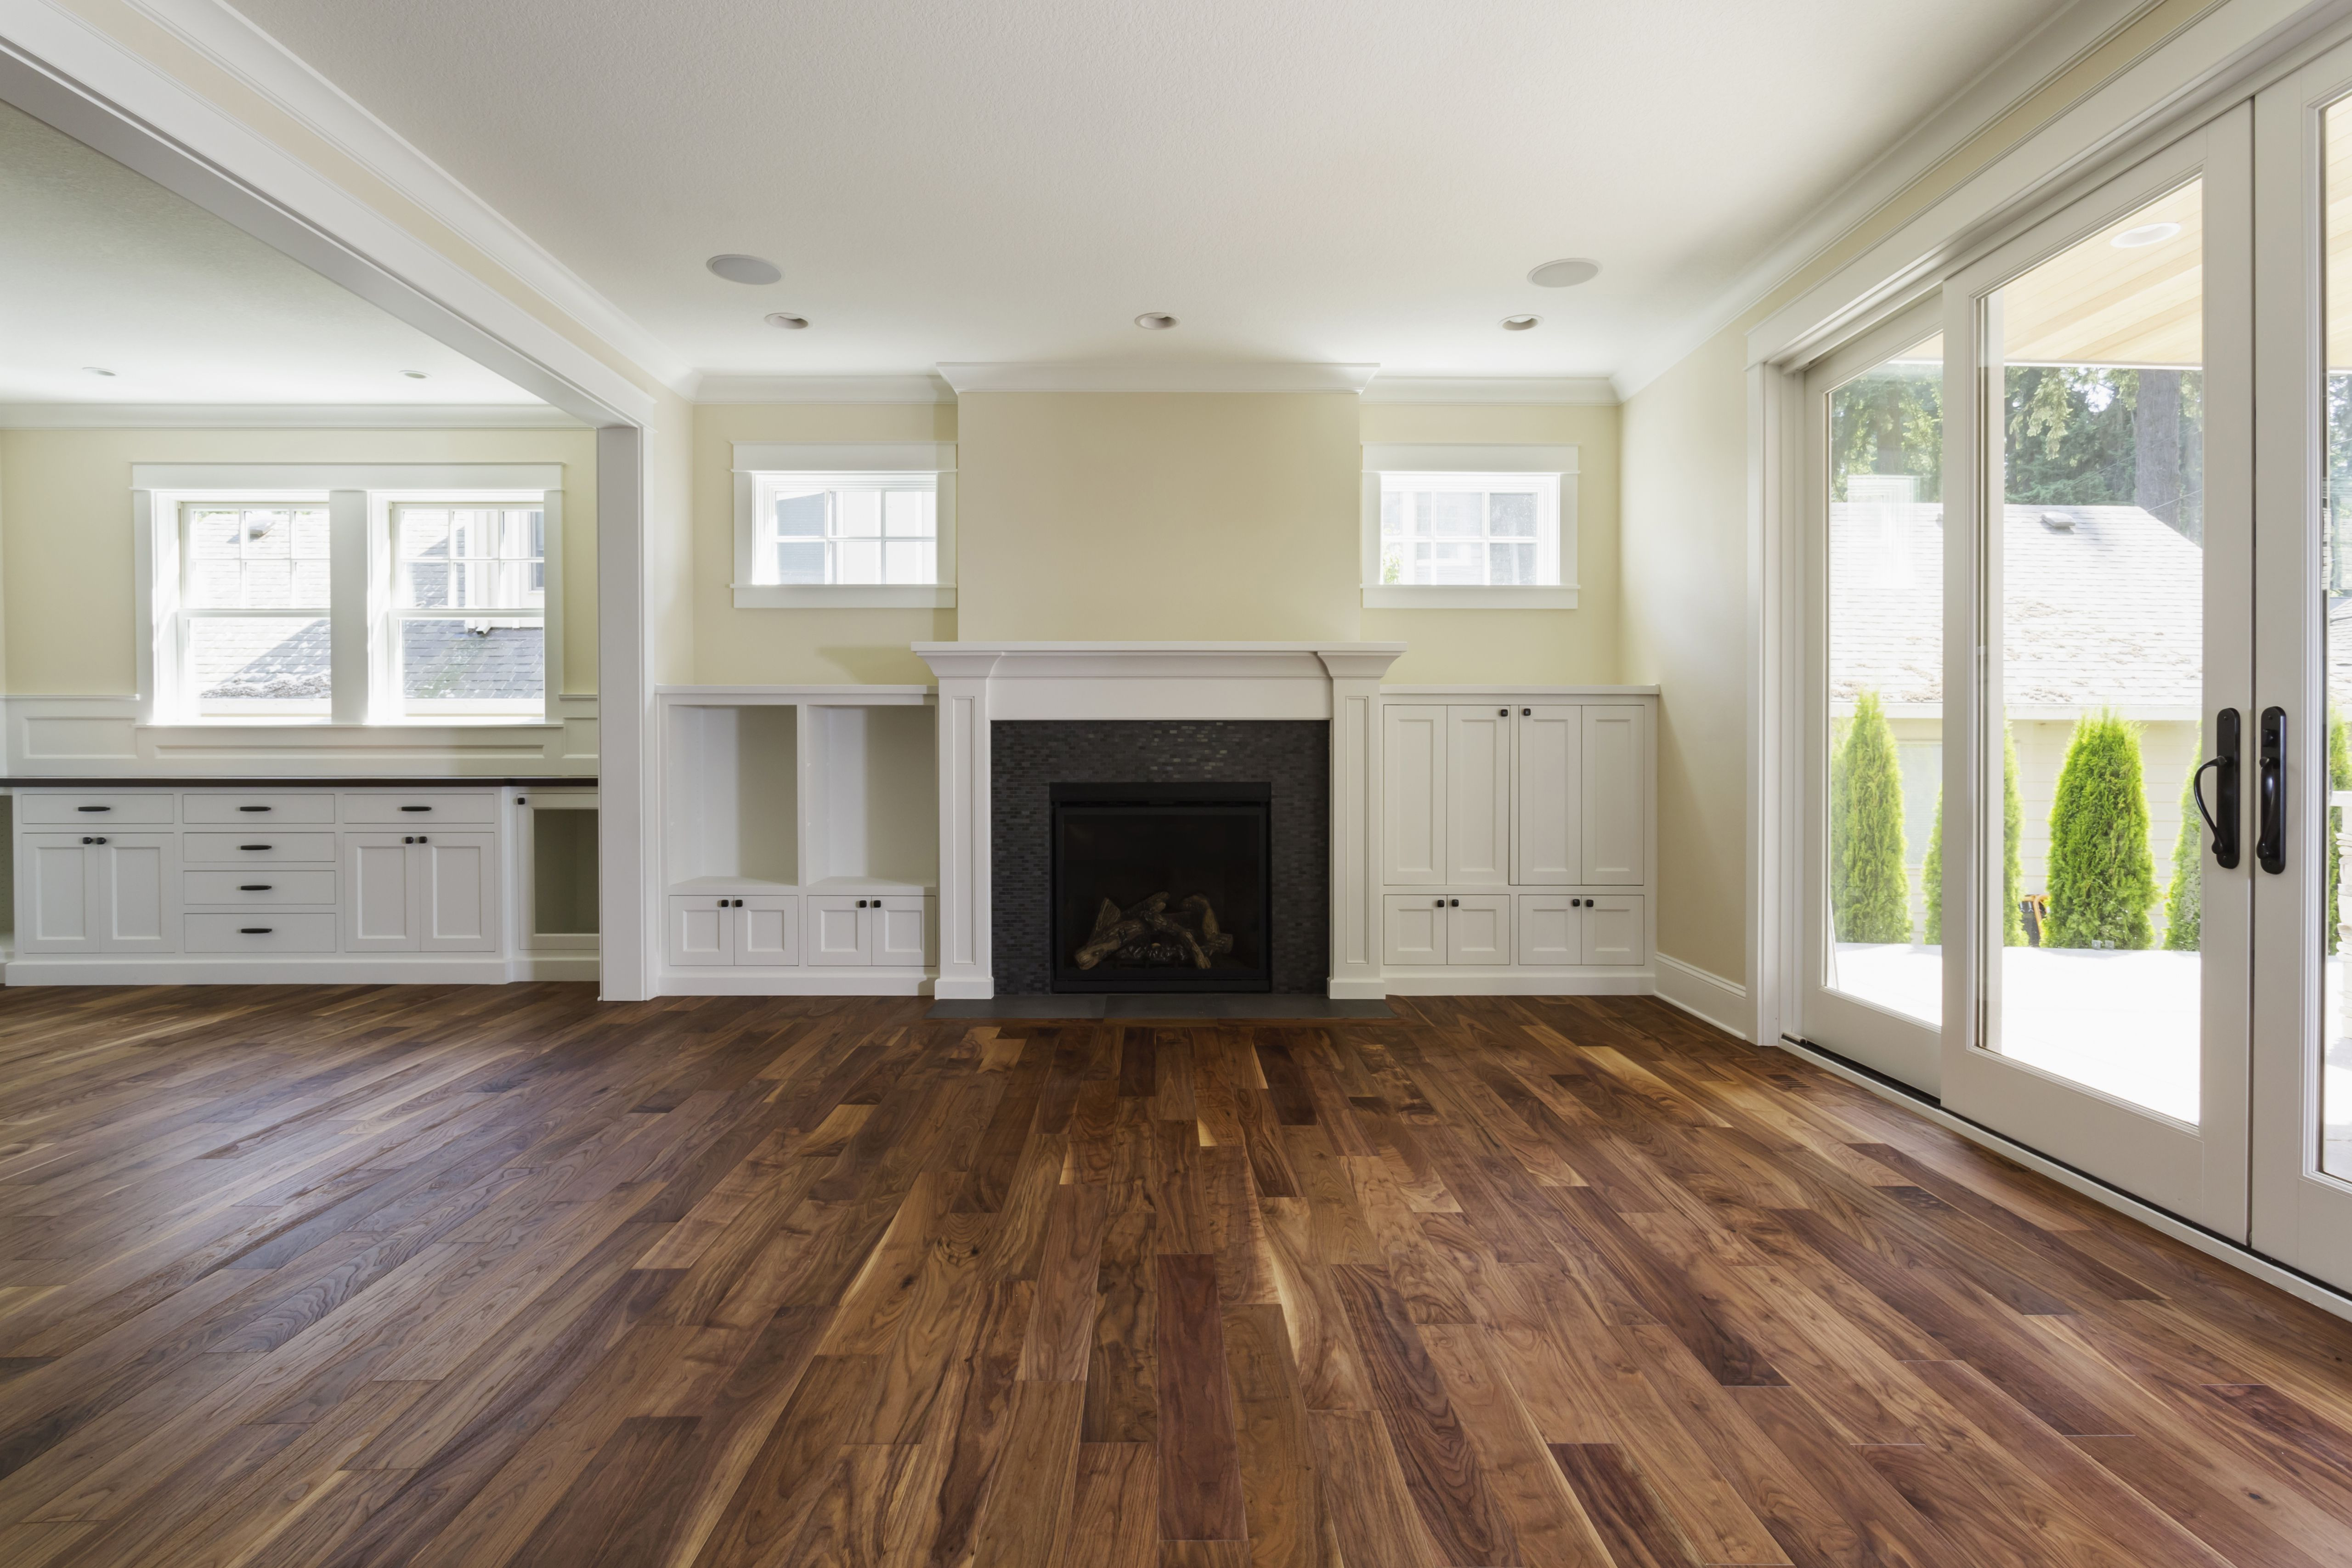 Refinish Hardwood Floors Diy Or Professional Of The Pros And Cons Of Prefinished Hardwood Flooring For Fireplace And Built In Shelves In Living Room 482143011 57bef8e33df78cc16e035397 